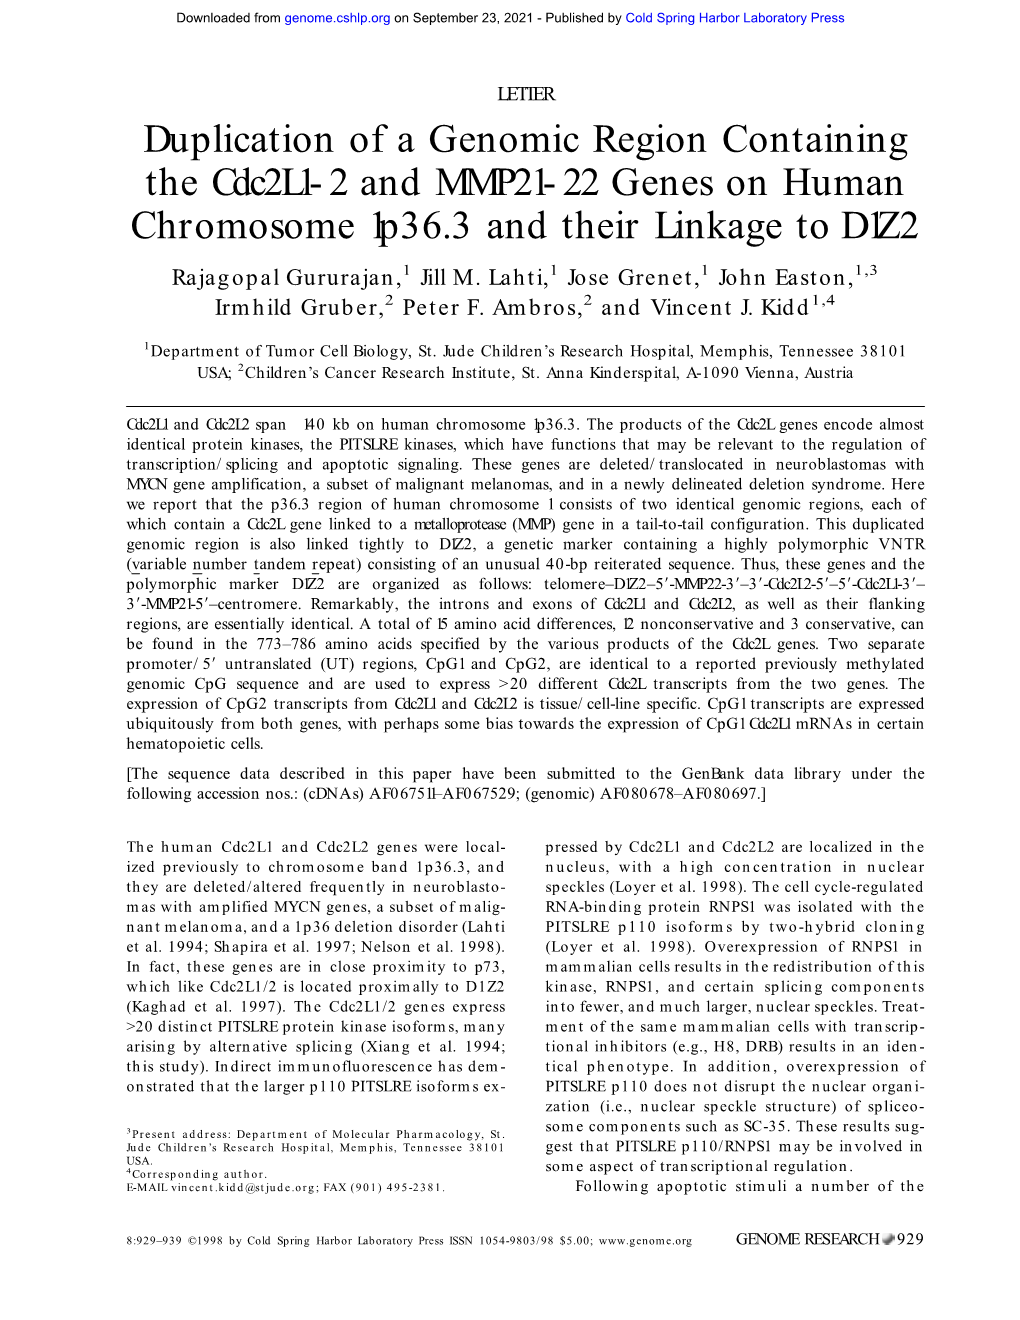 Duplication of a Genomic Region Containing the Cdc2l1-2 and MMP21-22 Genes on Human Chromosome 1P36.3 and Their Linkage to D1Z2 Rajagopal Gururajan,1 Jill M